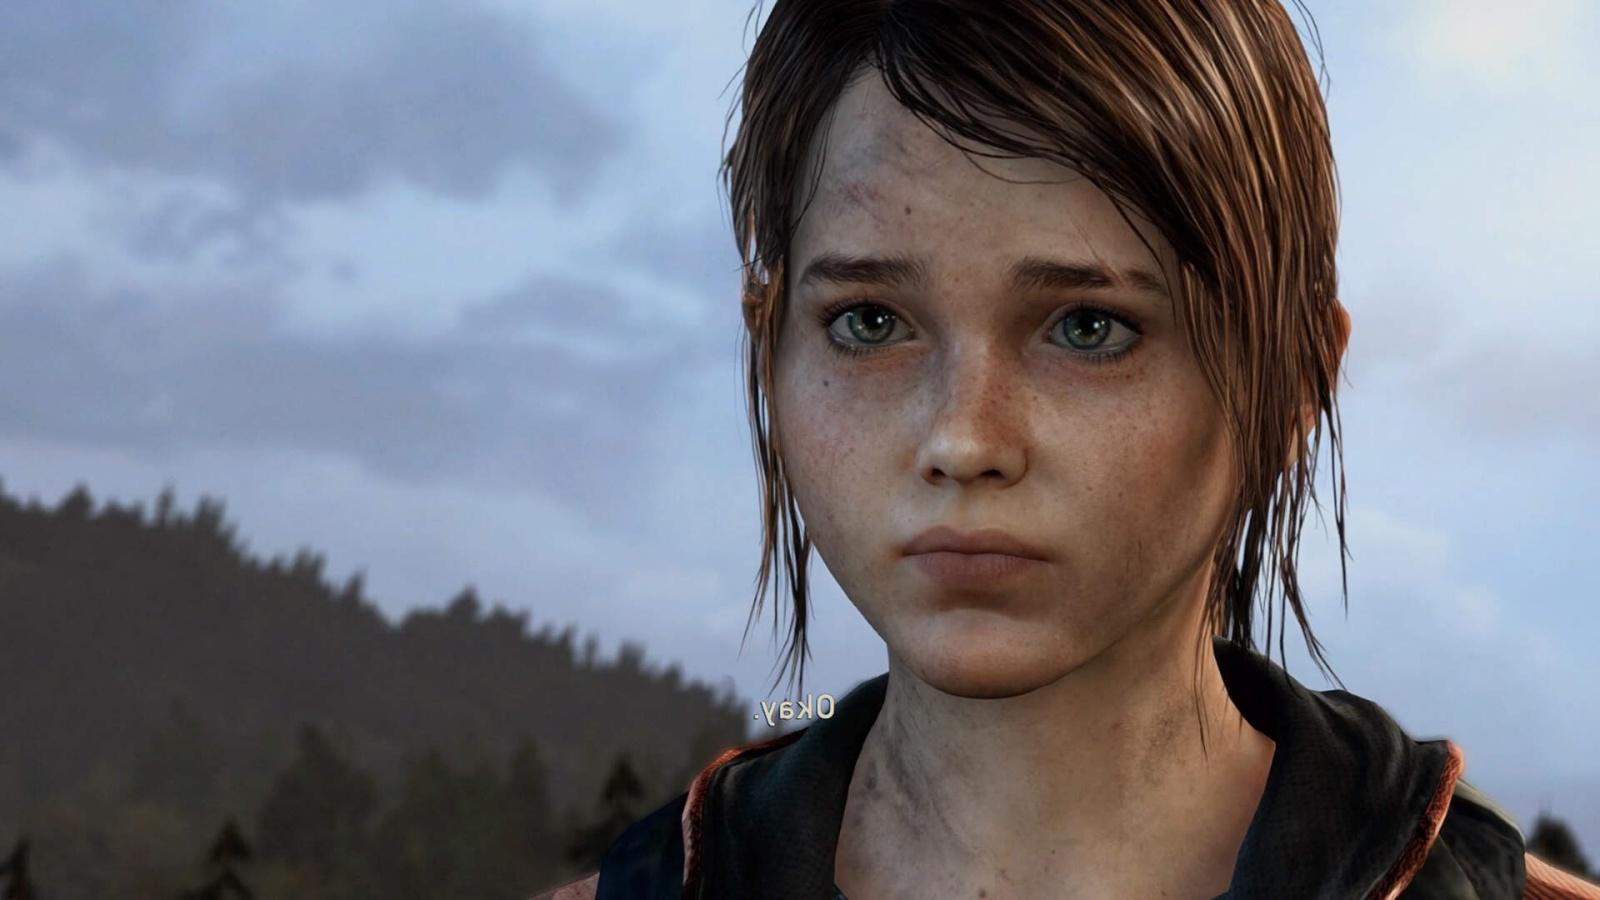 The Last of Us Part 1 now Steam Deck verified after controversial launch  issues - Dexerto